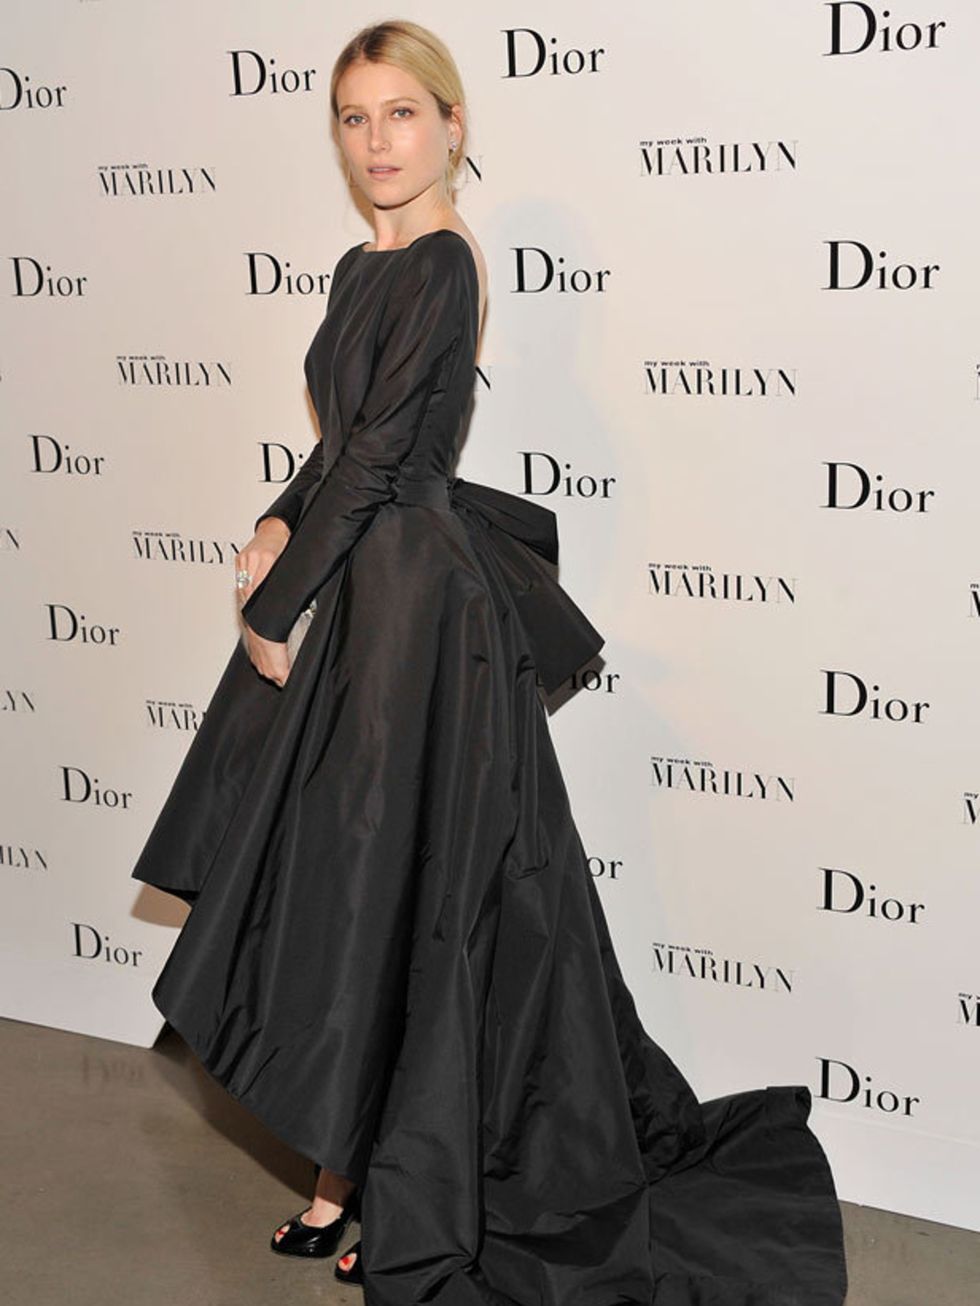 <p><a href="http://www.elleuk.com/starstyle/style-files/(section)/dree-hemingway">Dree Heminway</a> in <a href="http://www.elleuk.com/catwalk/collections/dior/">Dior </a>at the opening of the Picturing Marylin exhibition at the Milk Gallery in New York 